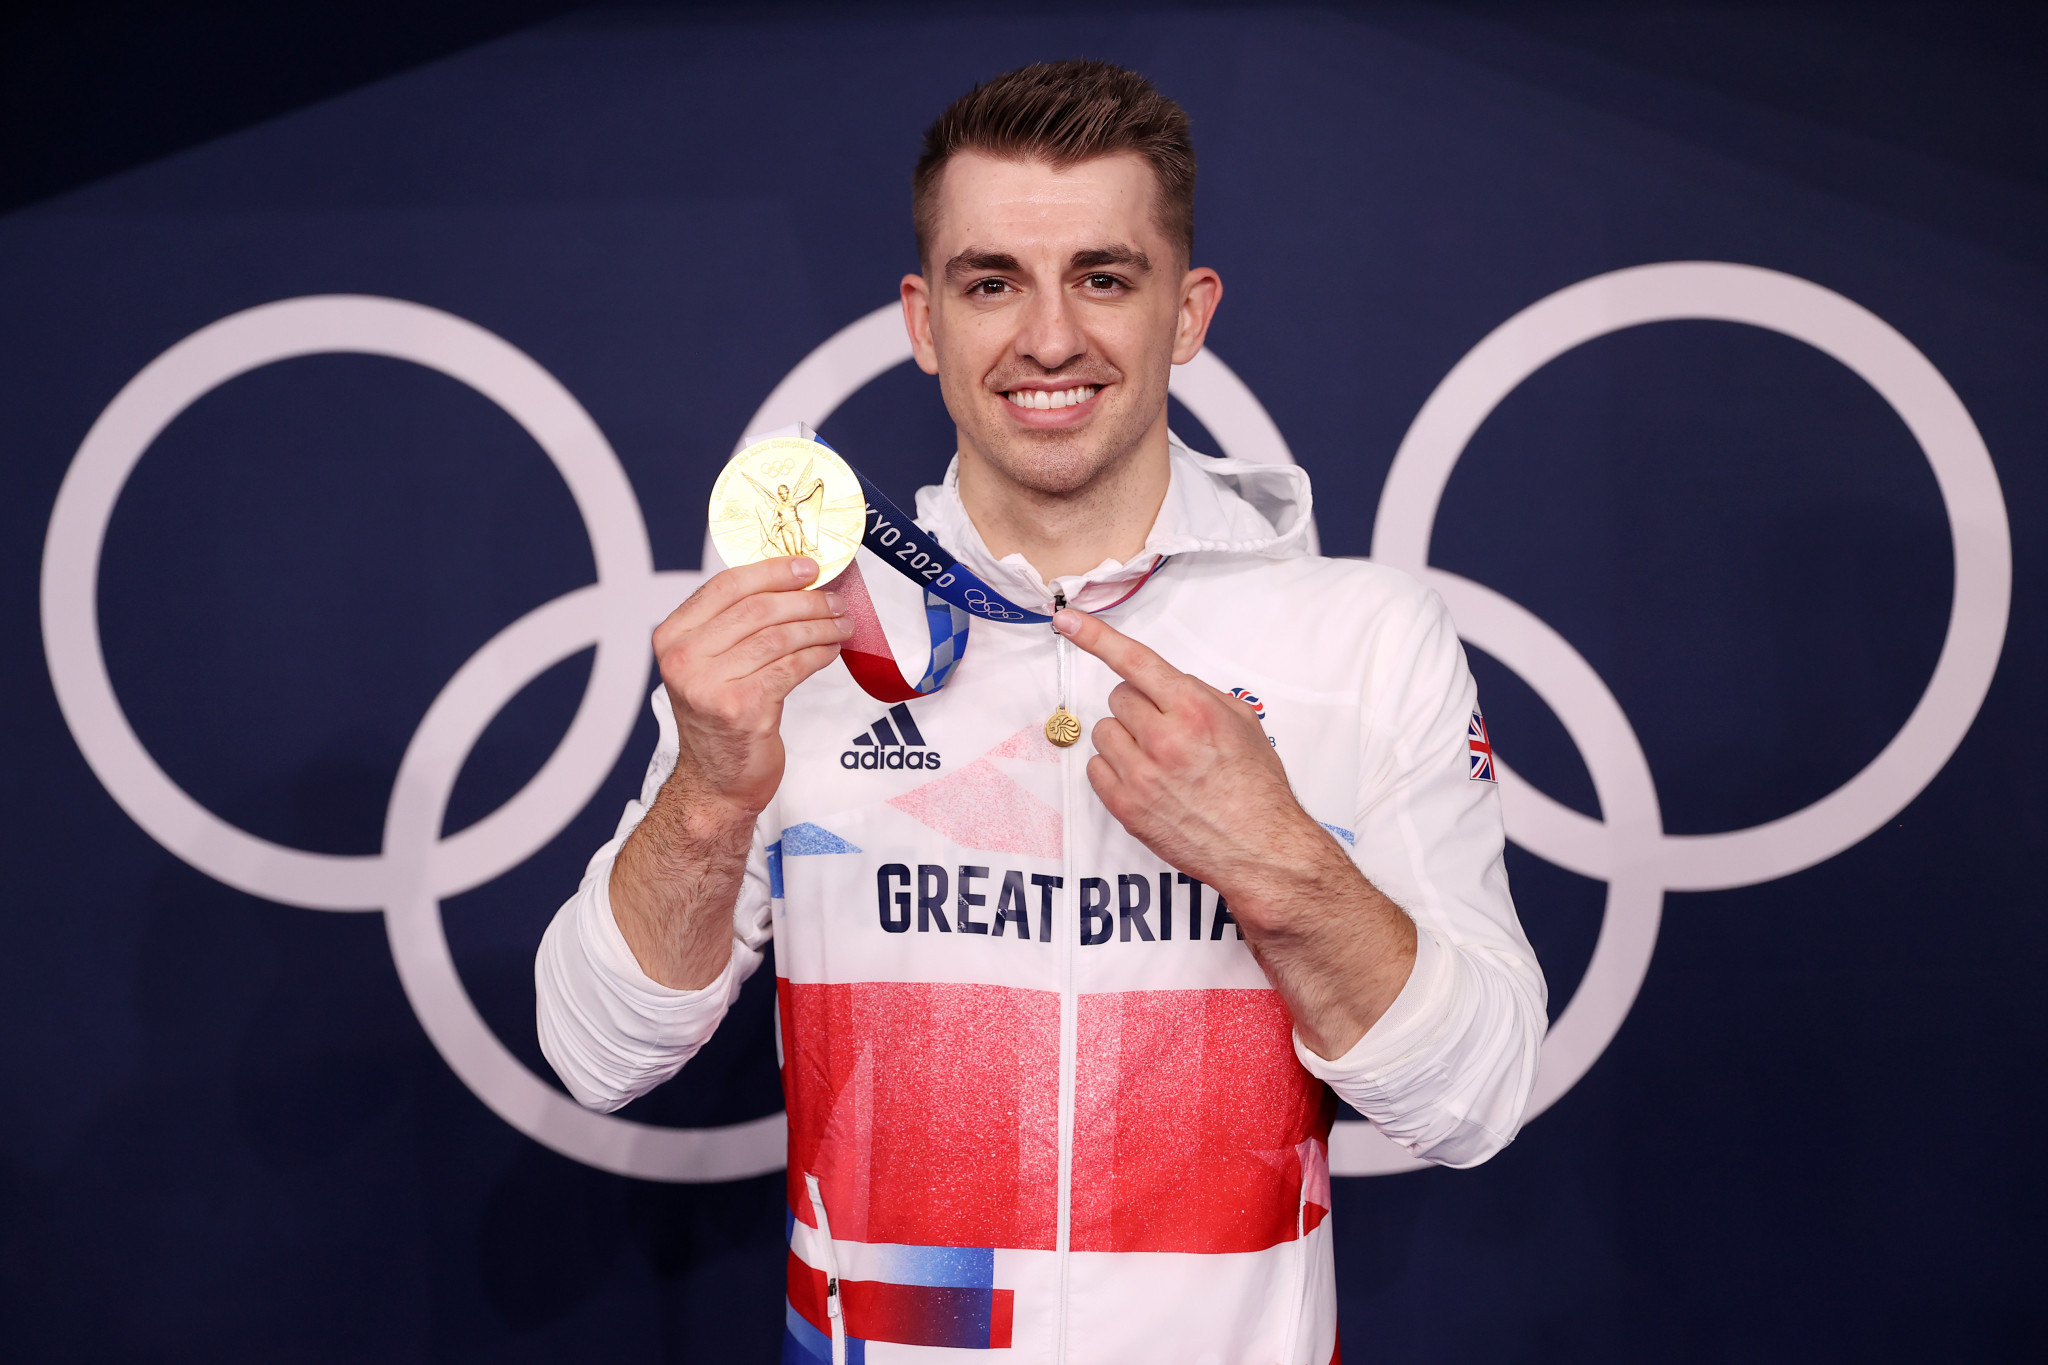 British swimmers, boxers and gymnasts, like Max Whitlock, are due to prepare for the Paris 2024 Olympic Games in Reims ©Getty Images